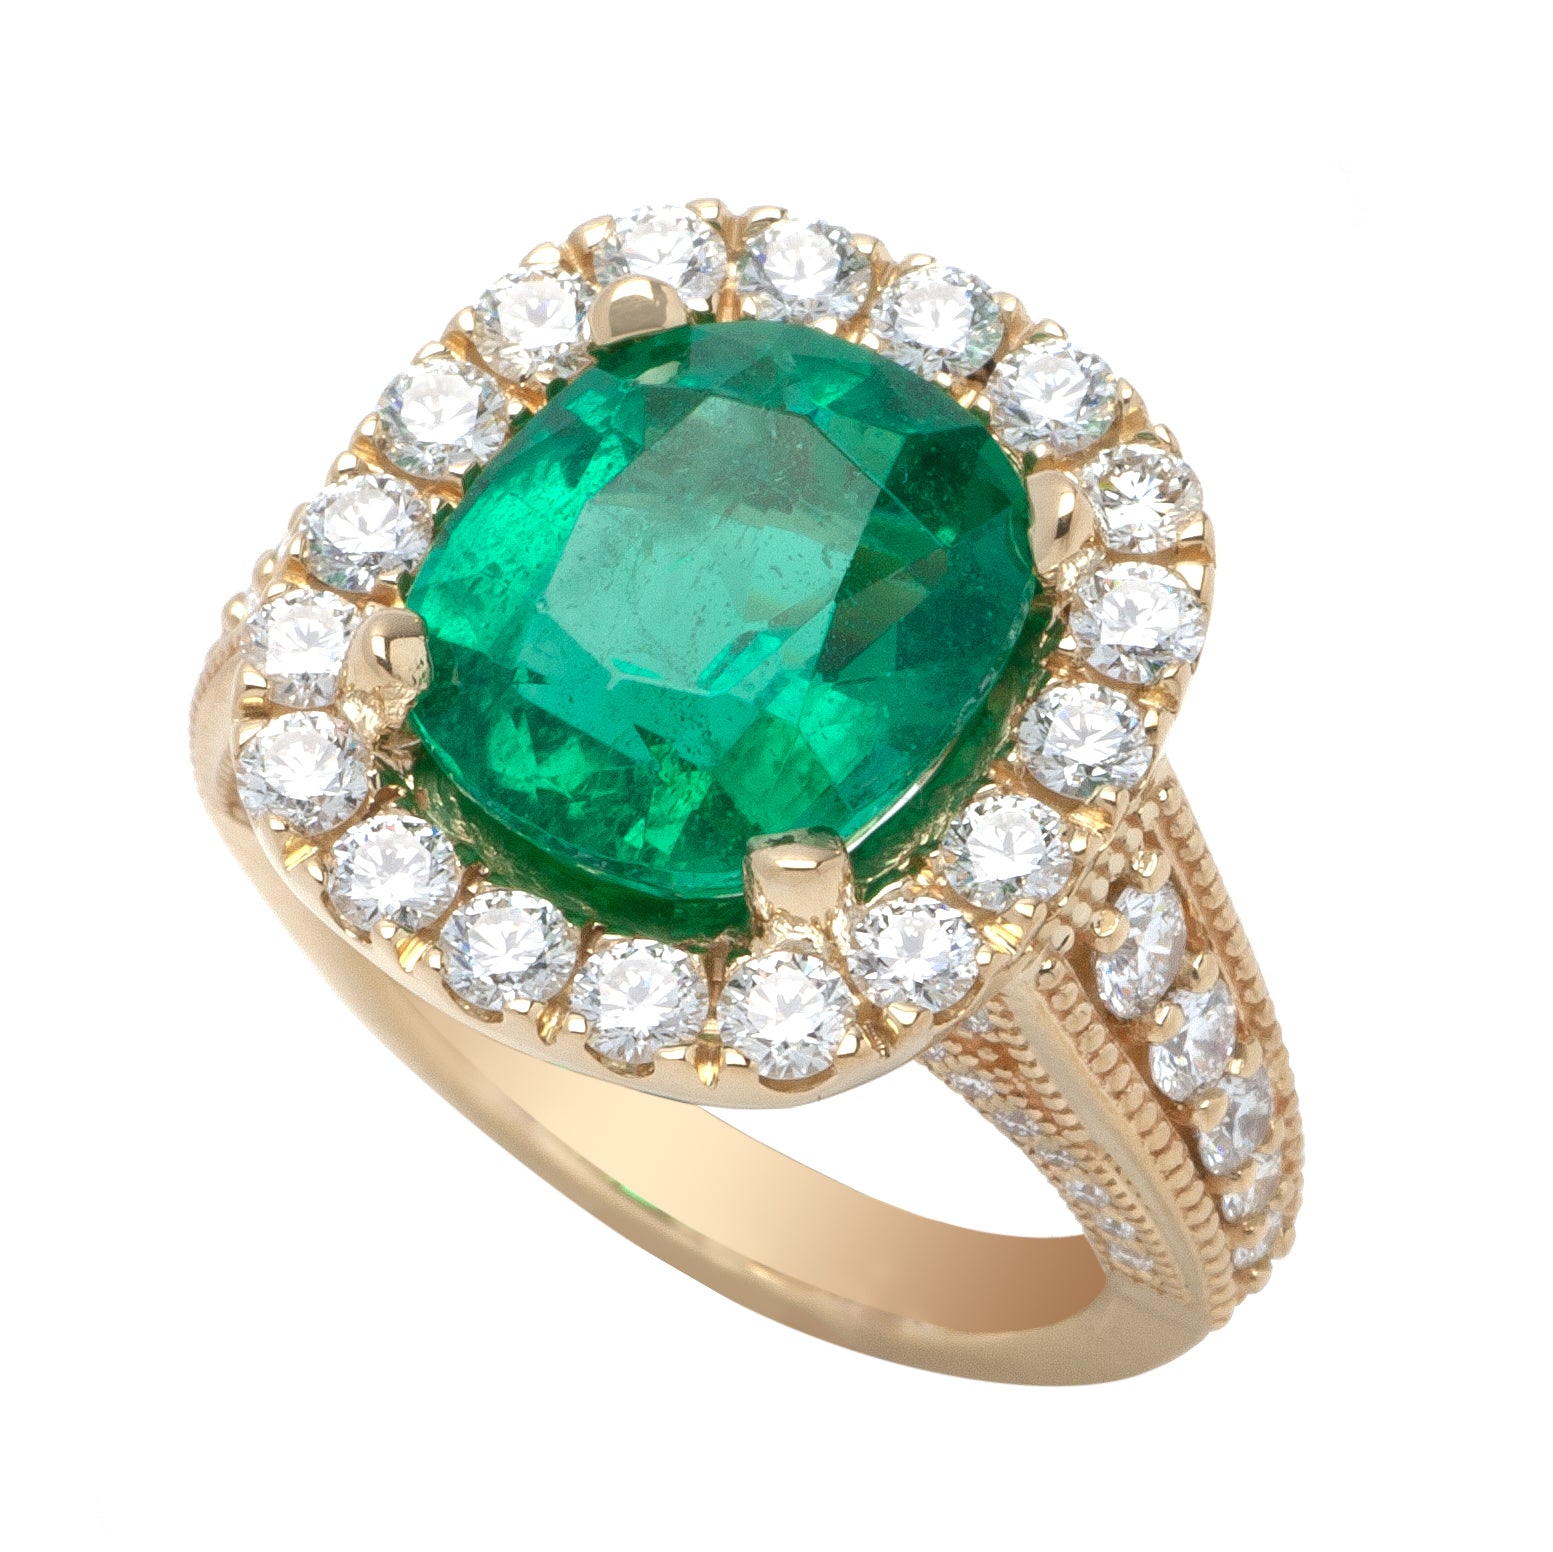 Breathtaking Emerald Ring | Inter-Continental Jewelers